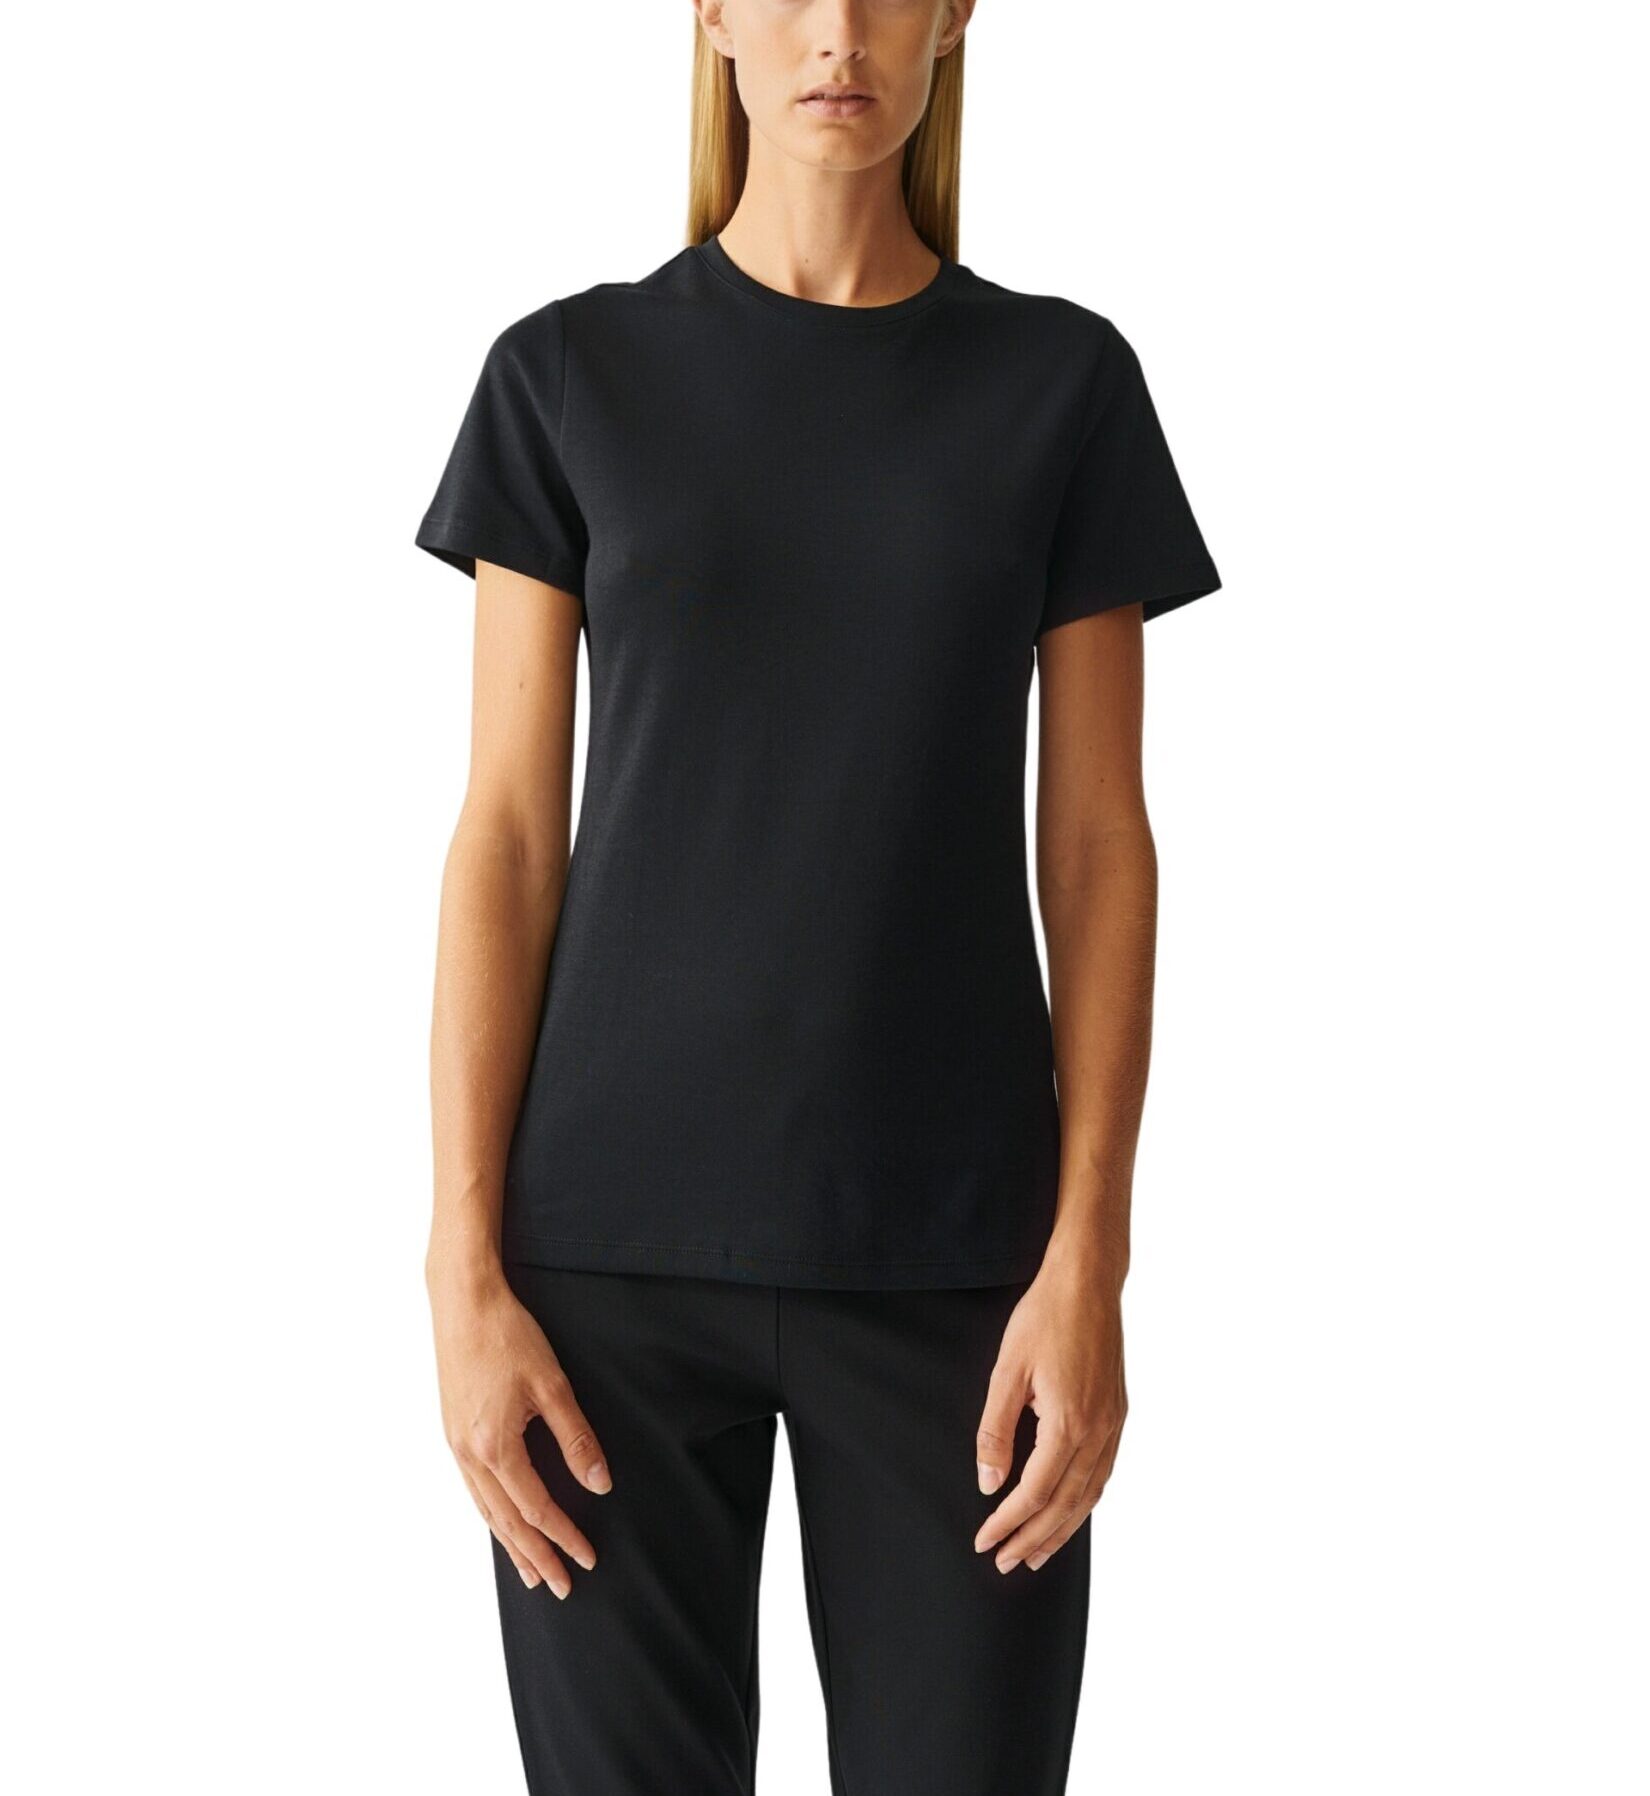 agnes-black-2023.06.19-juliejosphine_aw23_s45_1483-scaled-1